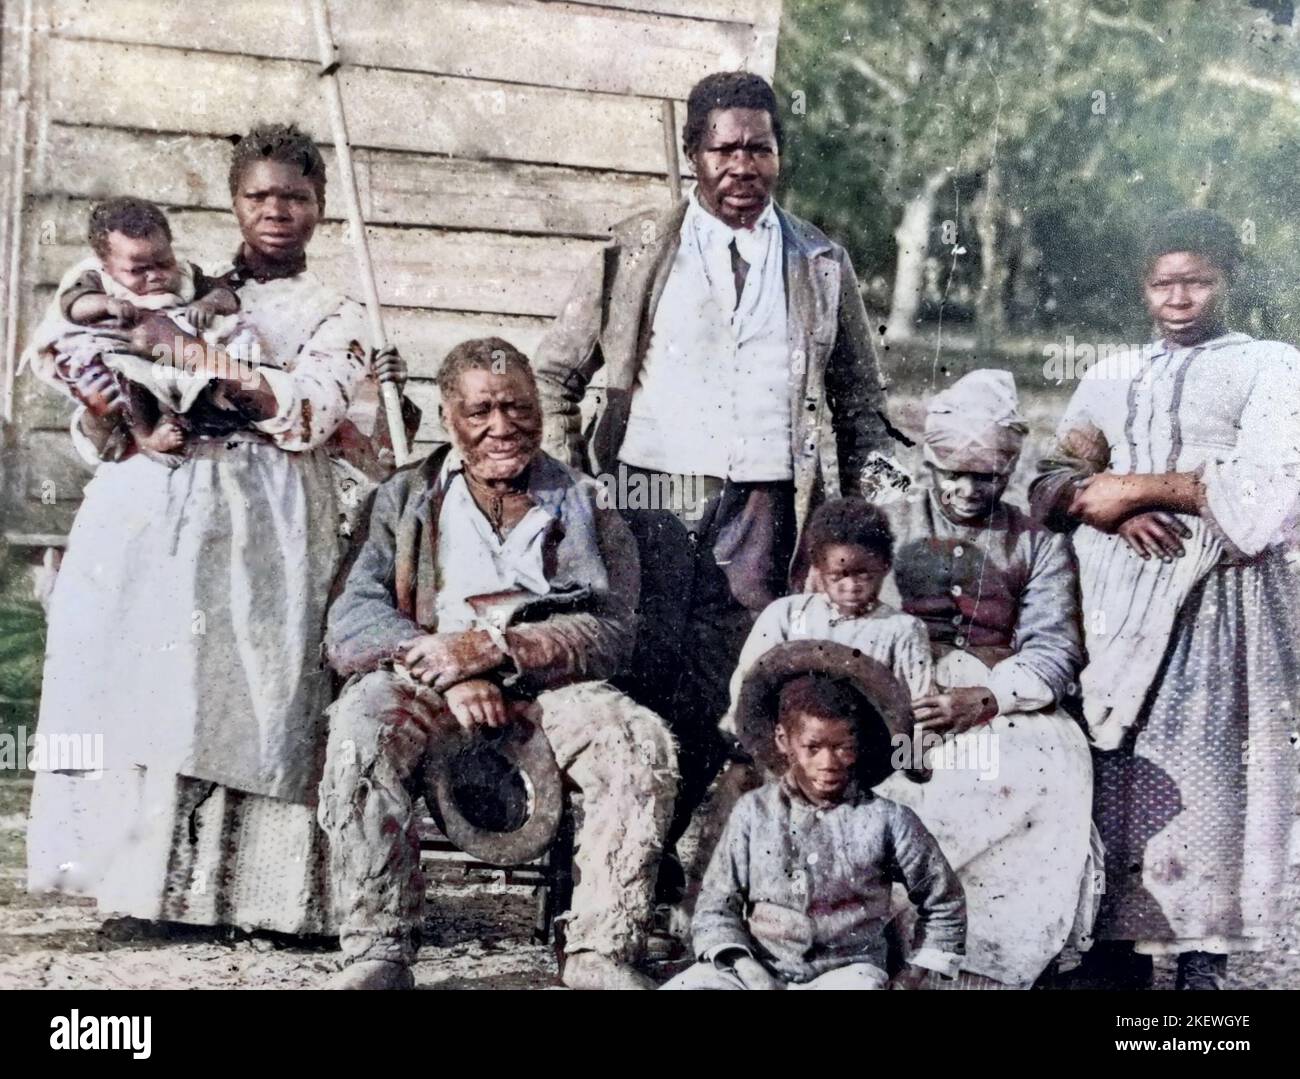 FORMER SLAVE FAMILY in South Carolina. Photo by Irish-American photographer Timothy O'Sullivan (1840-1882) after Union forces  captured the Sea Island coastal area of the state. Colourised image. Stock Photo